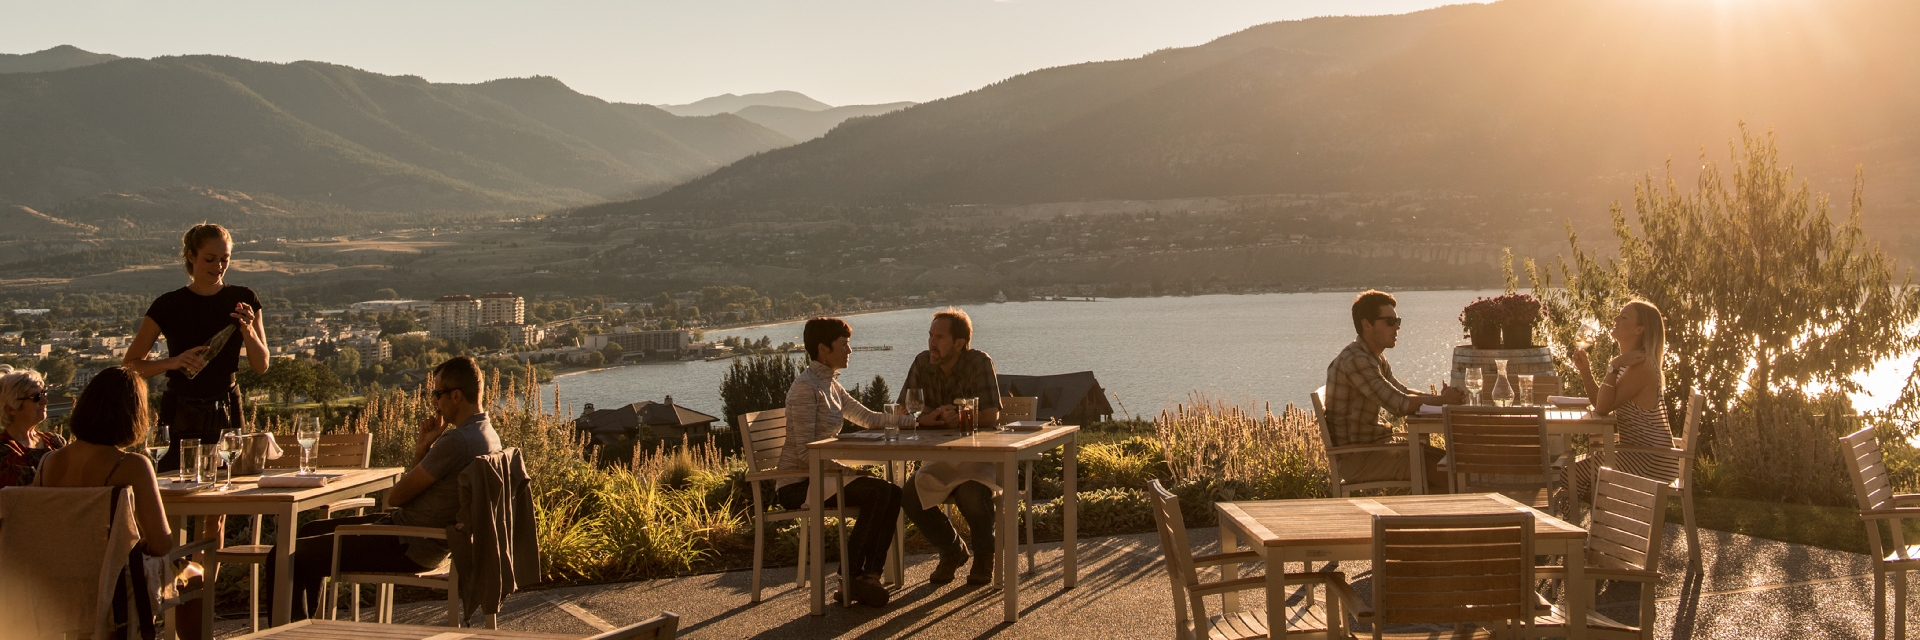 Patrons of The Vanilla Pod Restaurant at Poplar Grove winery enjoy dining on the patio with views of Okanagan Lake and Penticton, BC.